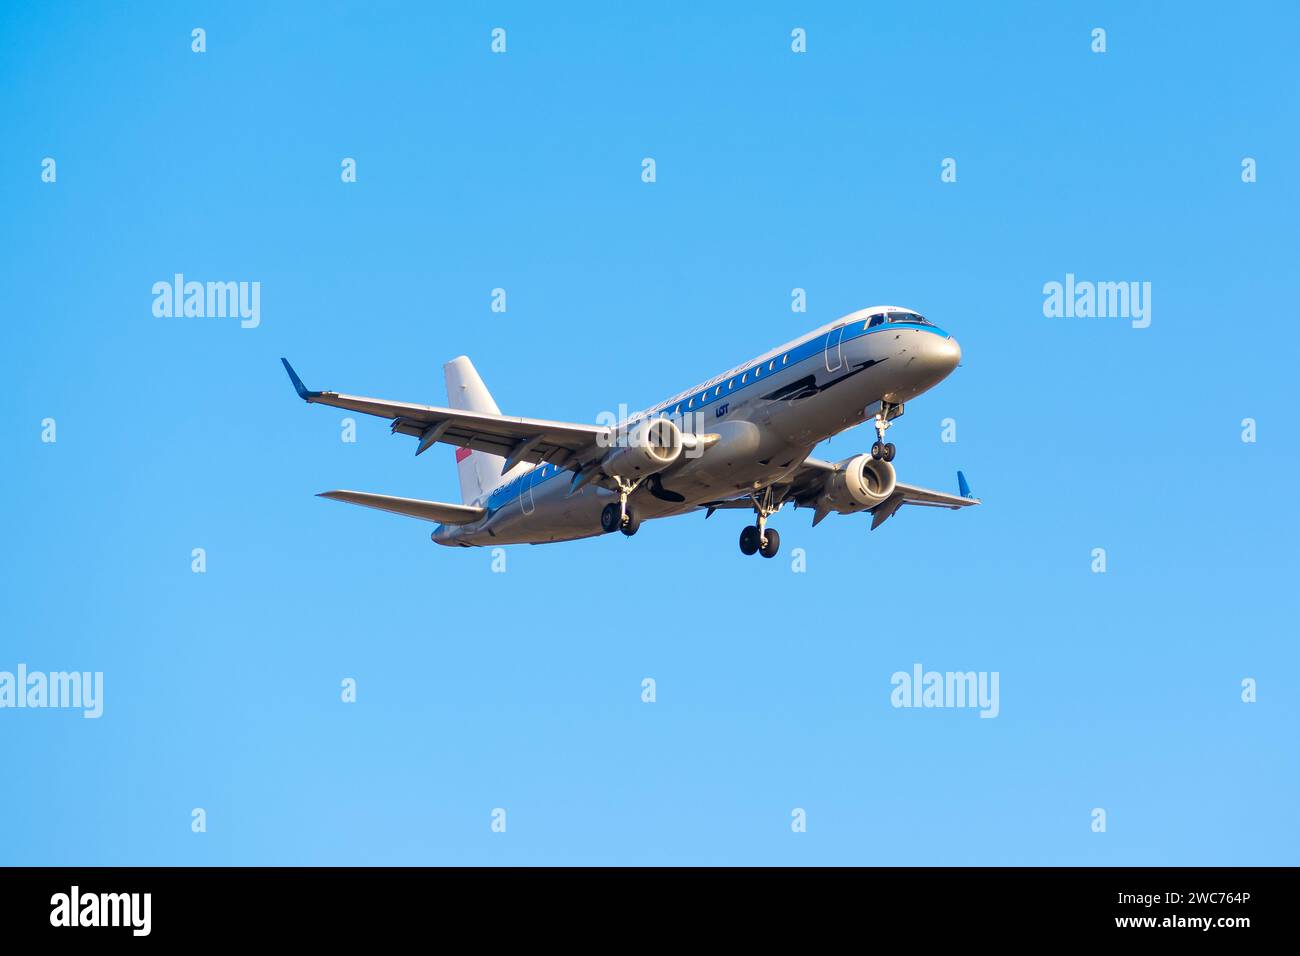 Boryspil, Ukraine - January 2, 2021: Airplane Embraer E175 (SP-LIM) of LOT Polish Airlines in Retro Livery is landing at Boryspil International Airpor Stock Photo